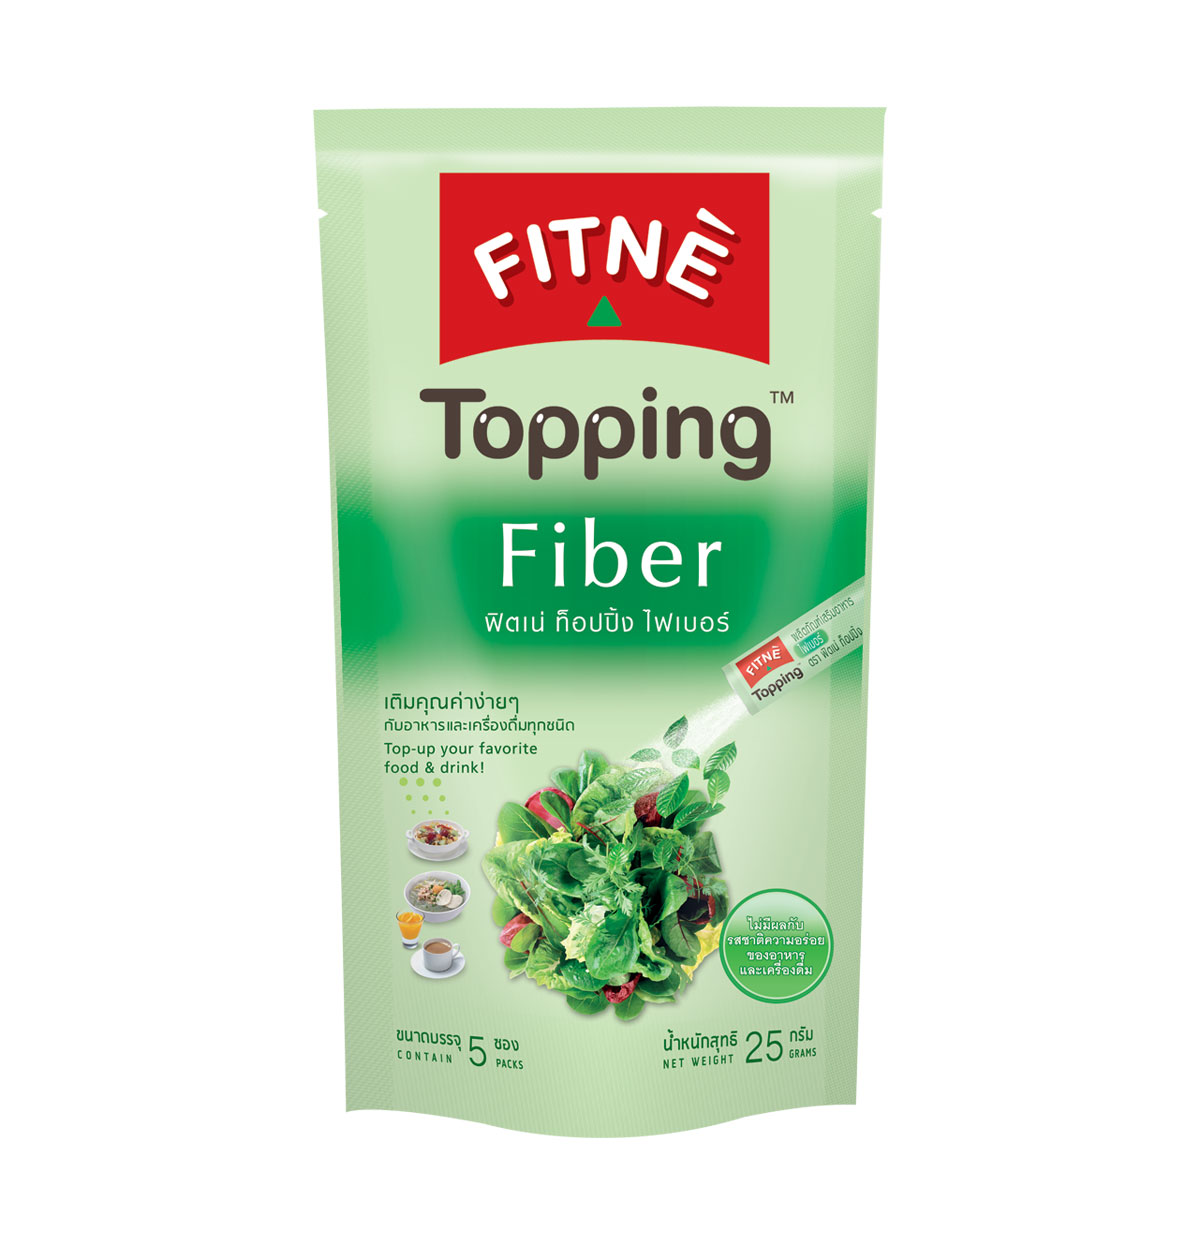 FITNE' Topping Fiber Dietary Supplement Product 5g.x5 Sticks